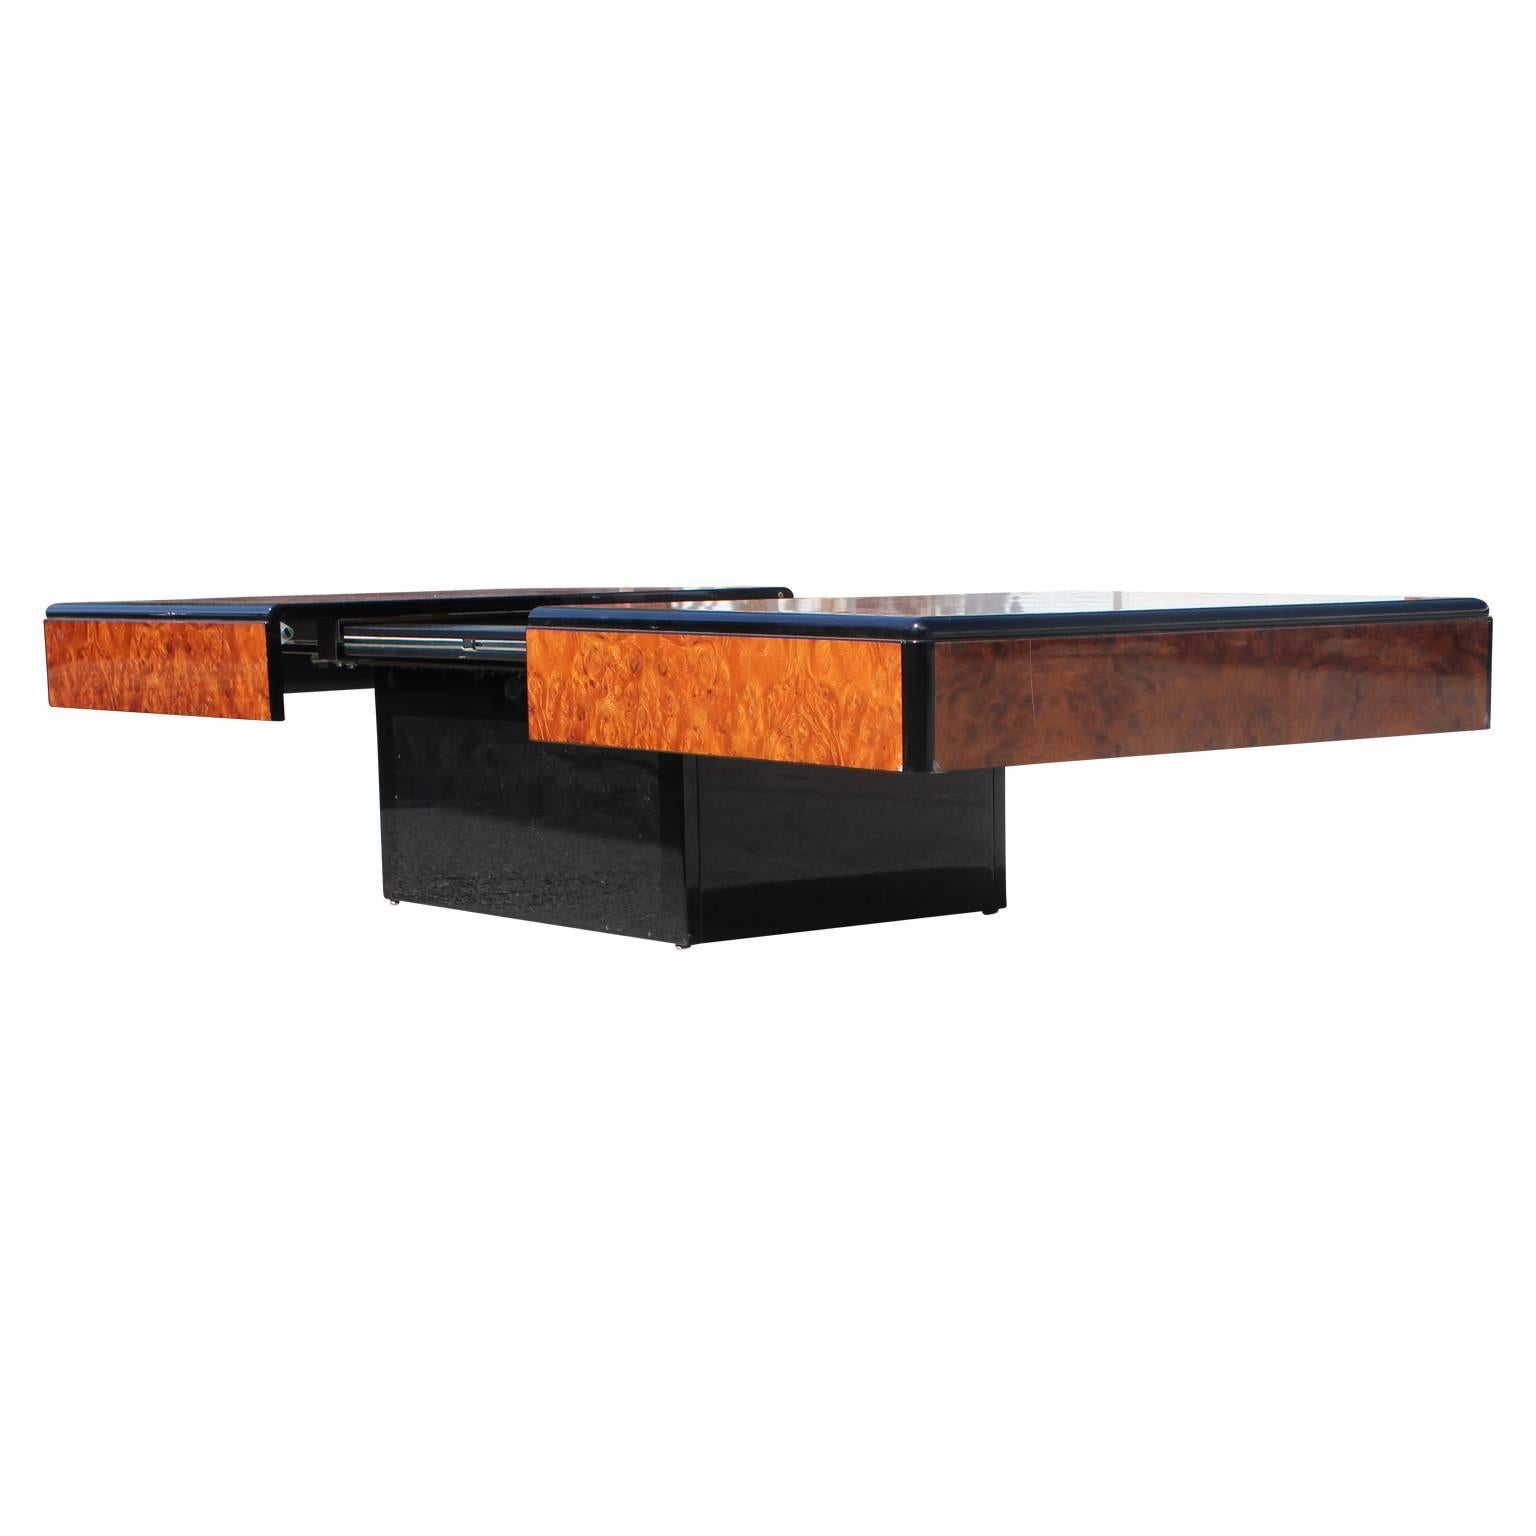 Mid-20th Century Modern Willy Rizzo Style Burl Wood and Mirrored Sliding Bar Coffee Table